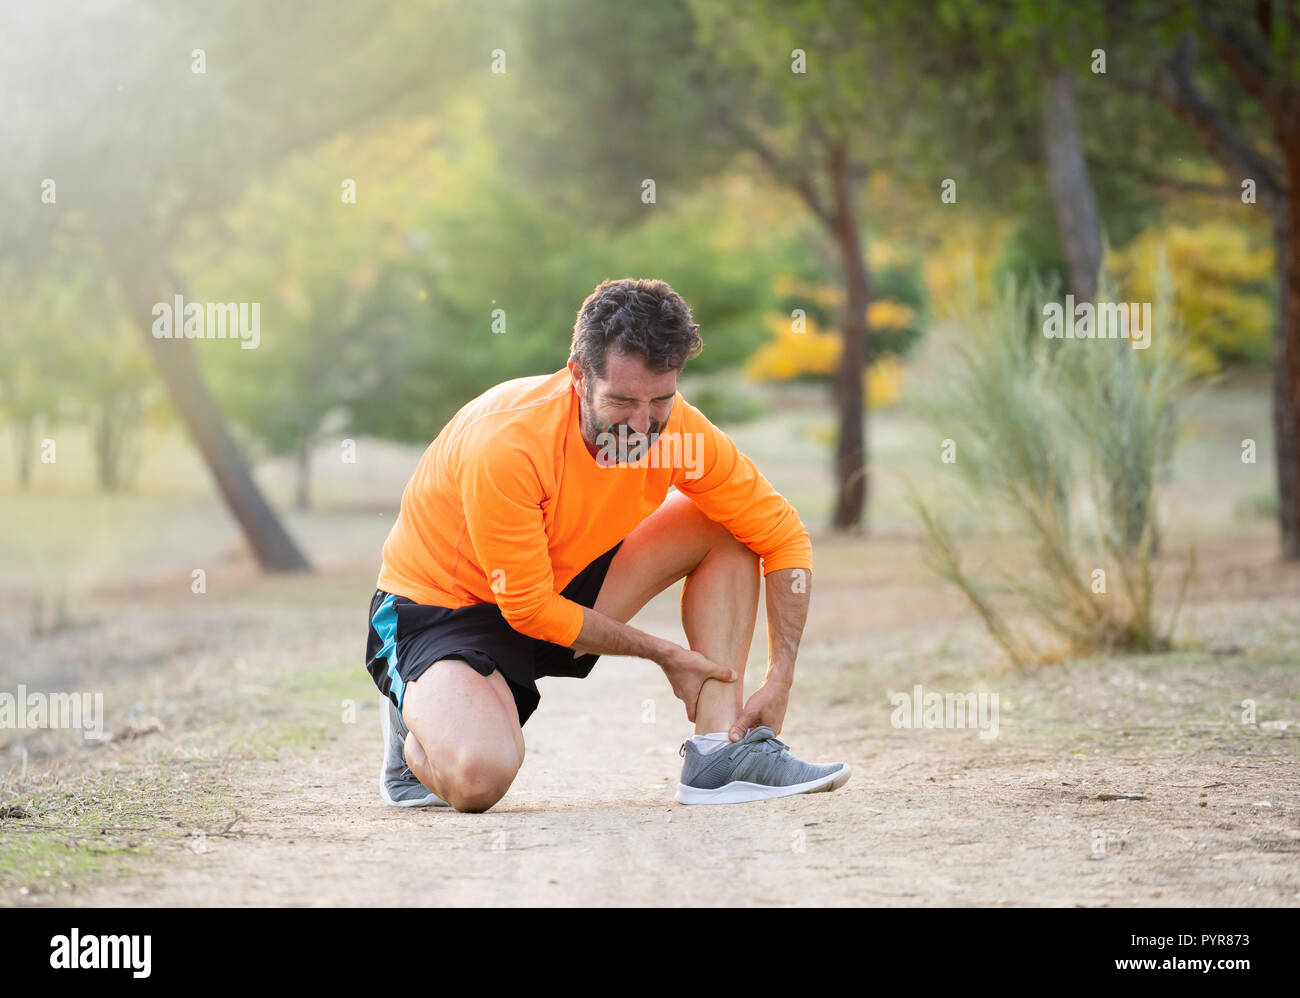 Athletic runner male screaming in pain holding his ankle with painful foot sore leg from running and training accident in park outdoors in Physical in Stock Photo